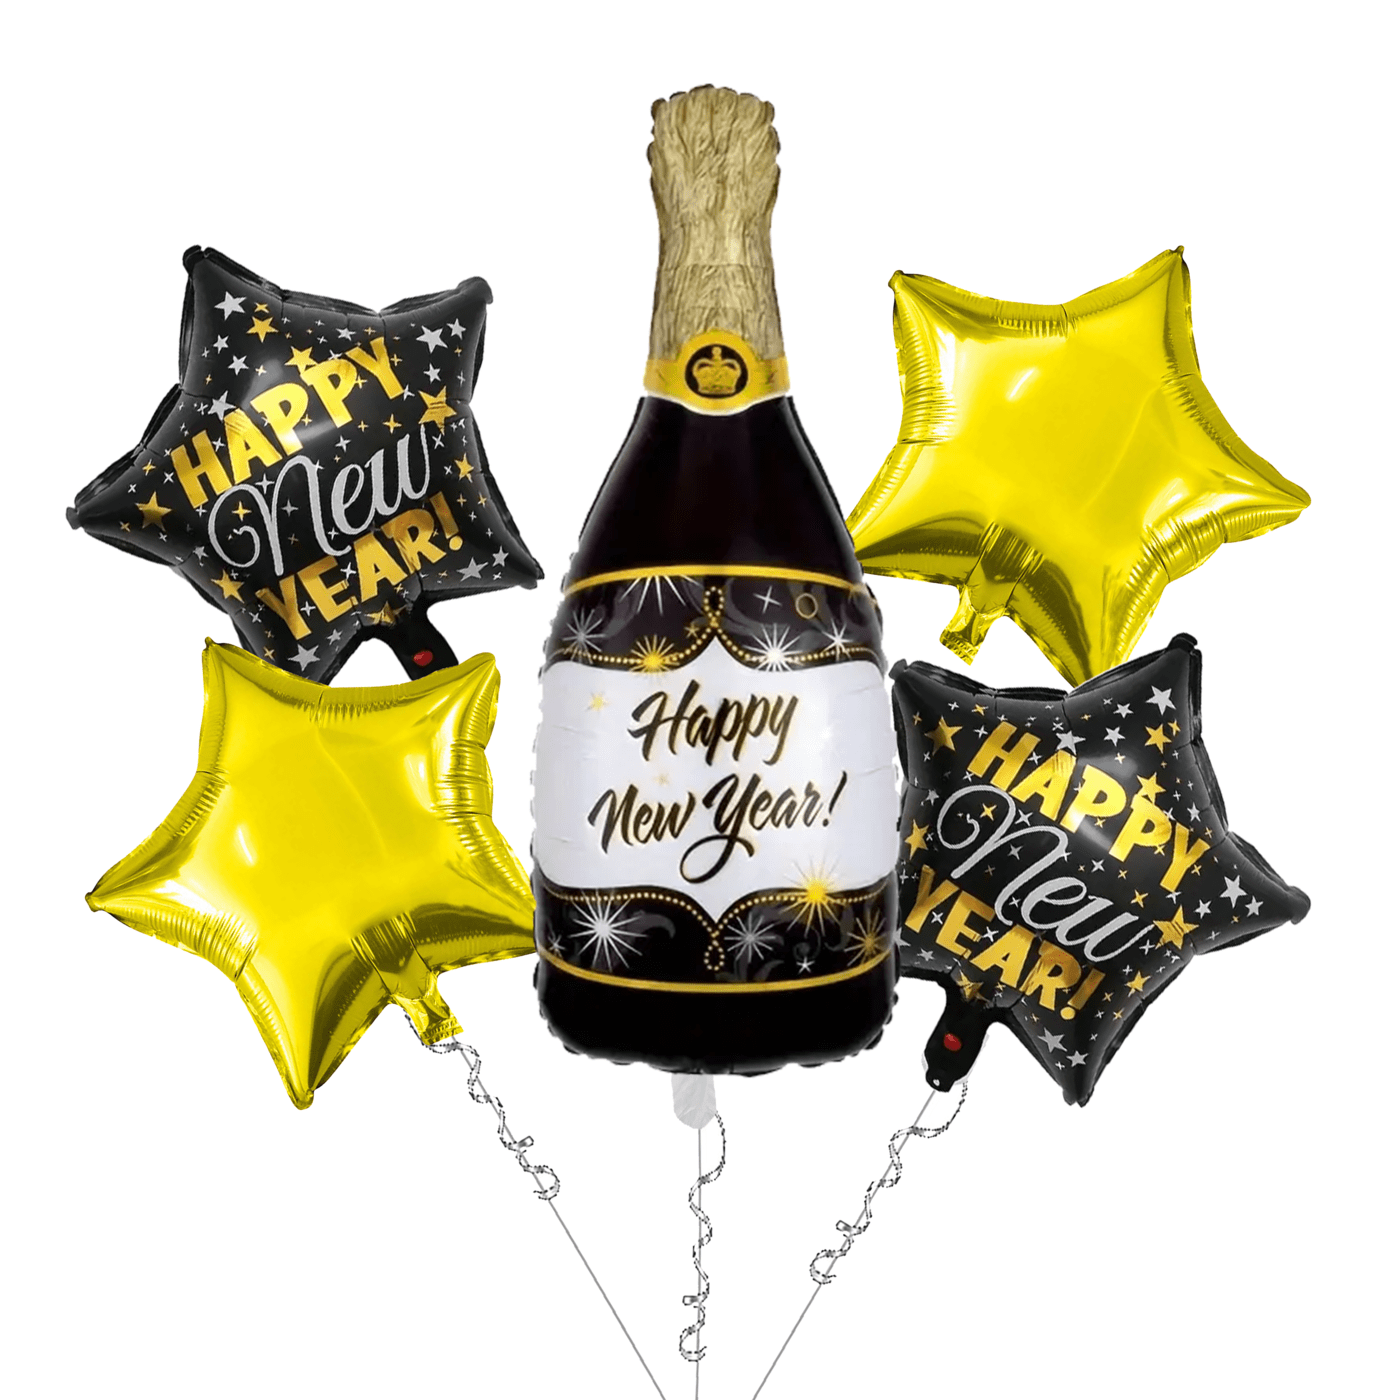 The Magic Balloons - New Year Theme Foil Balloons combo Kit For New Year Party Decoration Pack of 5pcs 2 Stars, 2 Circles And A Big Size Champion Bottle Foil Balloon For Home and Offices.